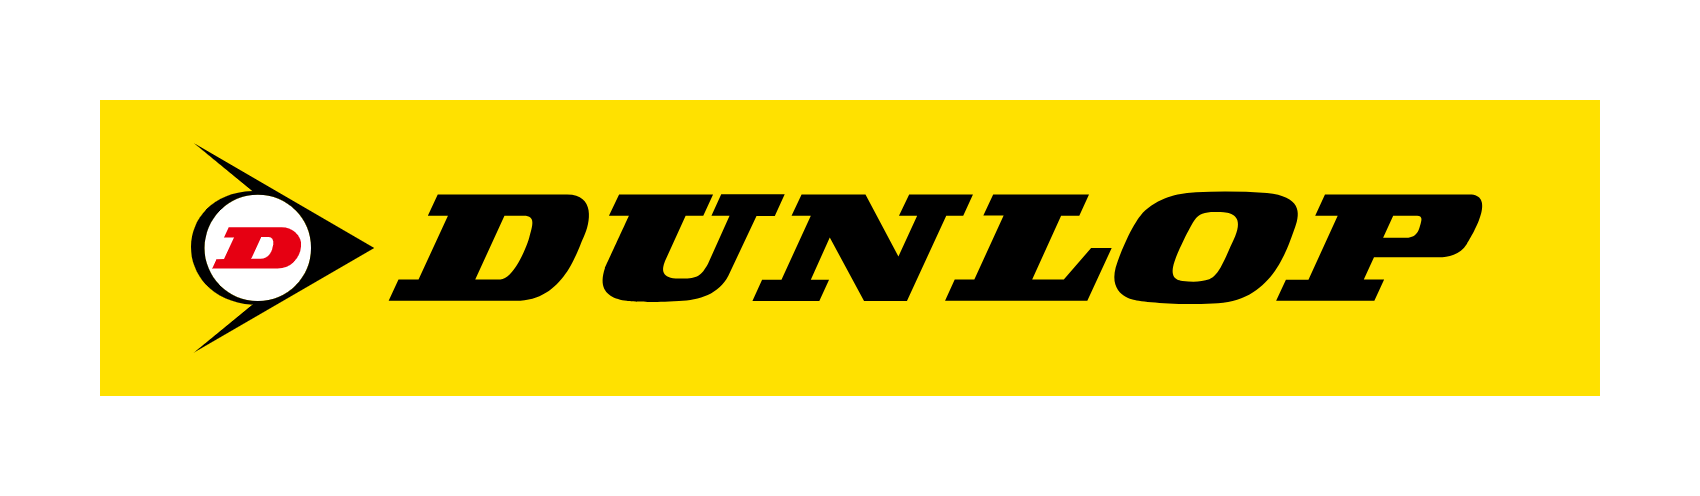 Team Dunlop Launches All-New Website | Dunlop Motorcycle